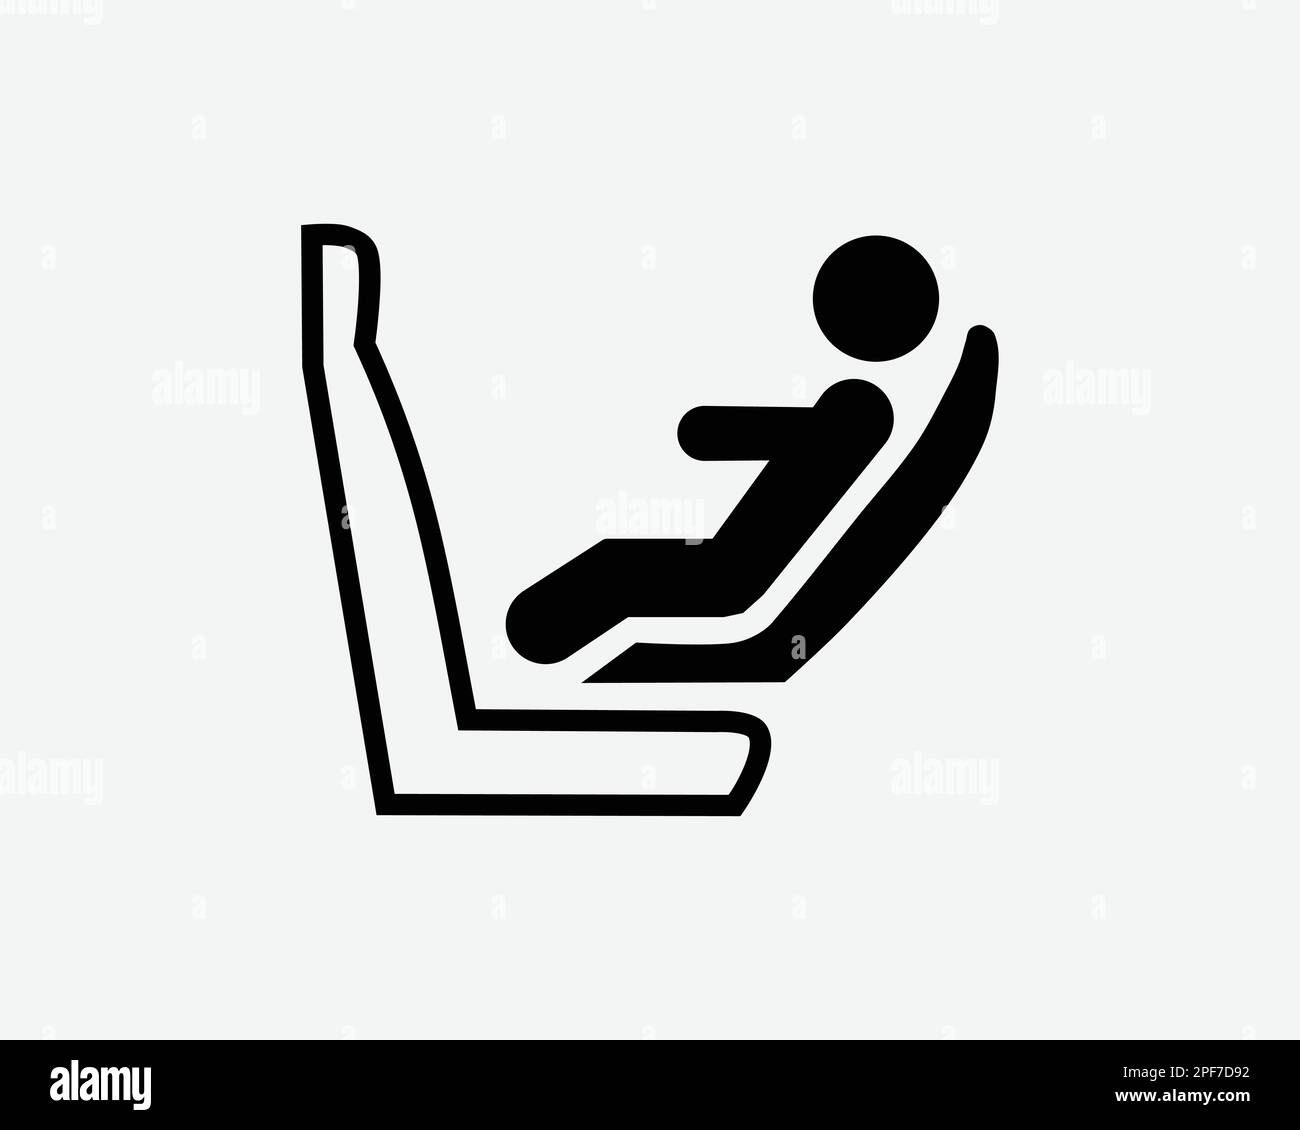 Rear Facing Child Seat Icon Children Car Vehicle Safety Chair Black White Silhouette Sign Symbol Vector Graphic Clipart Illustration Artwork Pictogram Stock Vector